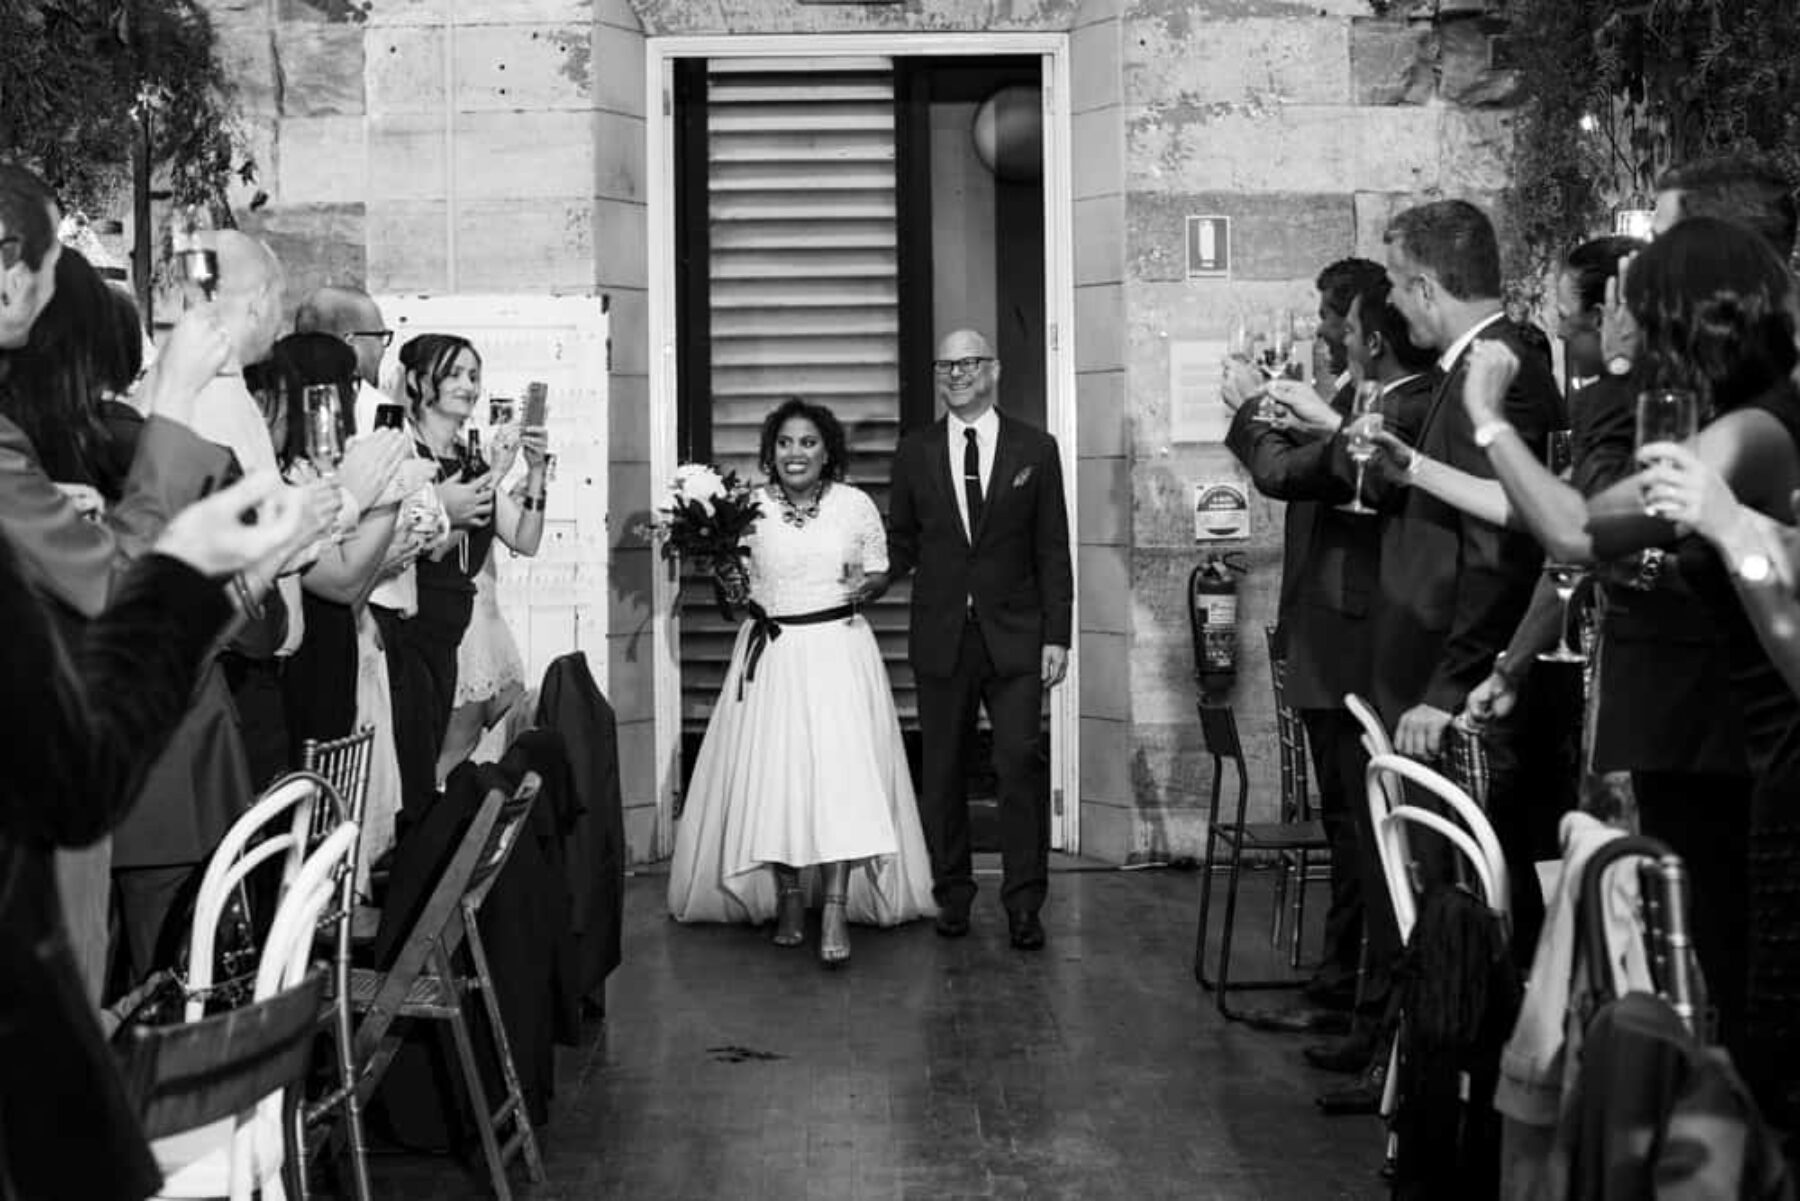 Classy-meets-disco wedding at the Cell Block Theatre Darlinghurst